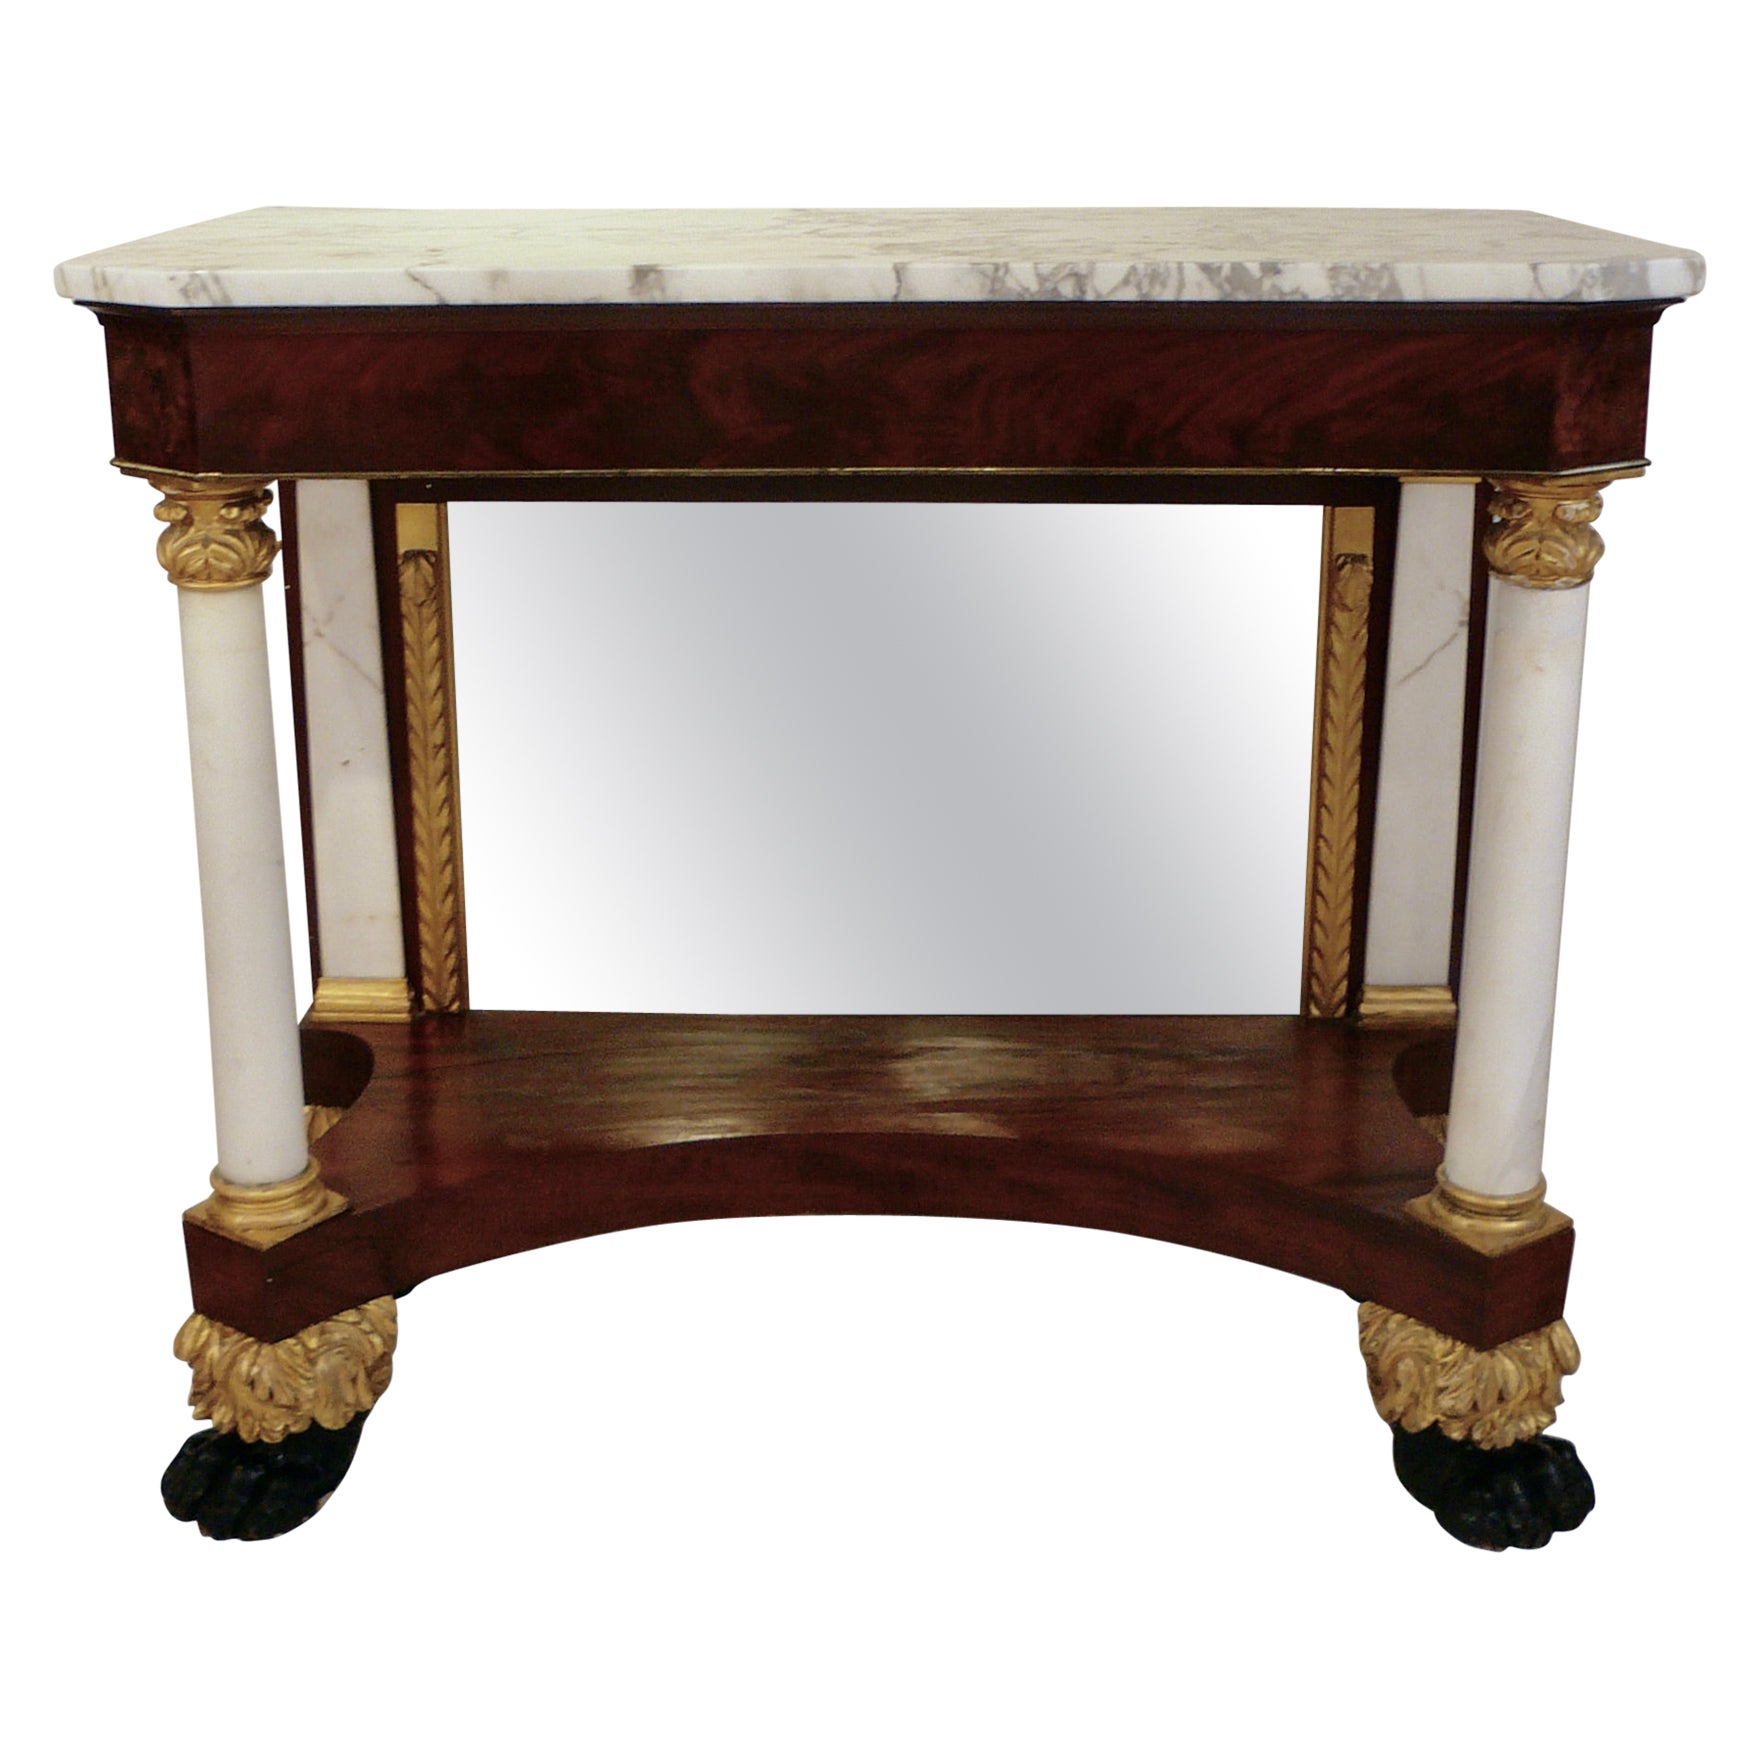 American Empire or Classical Pier Table, New York